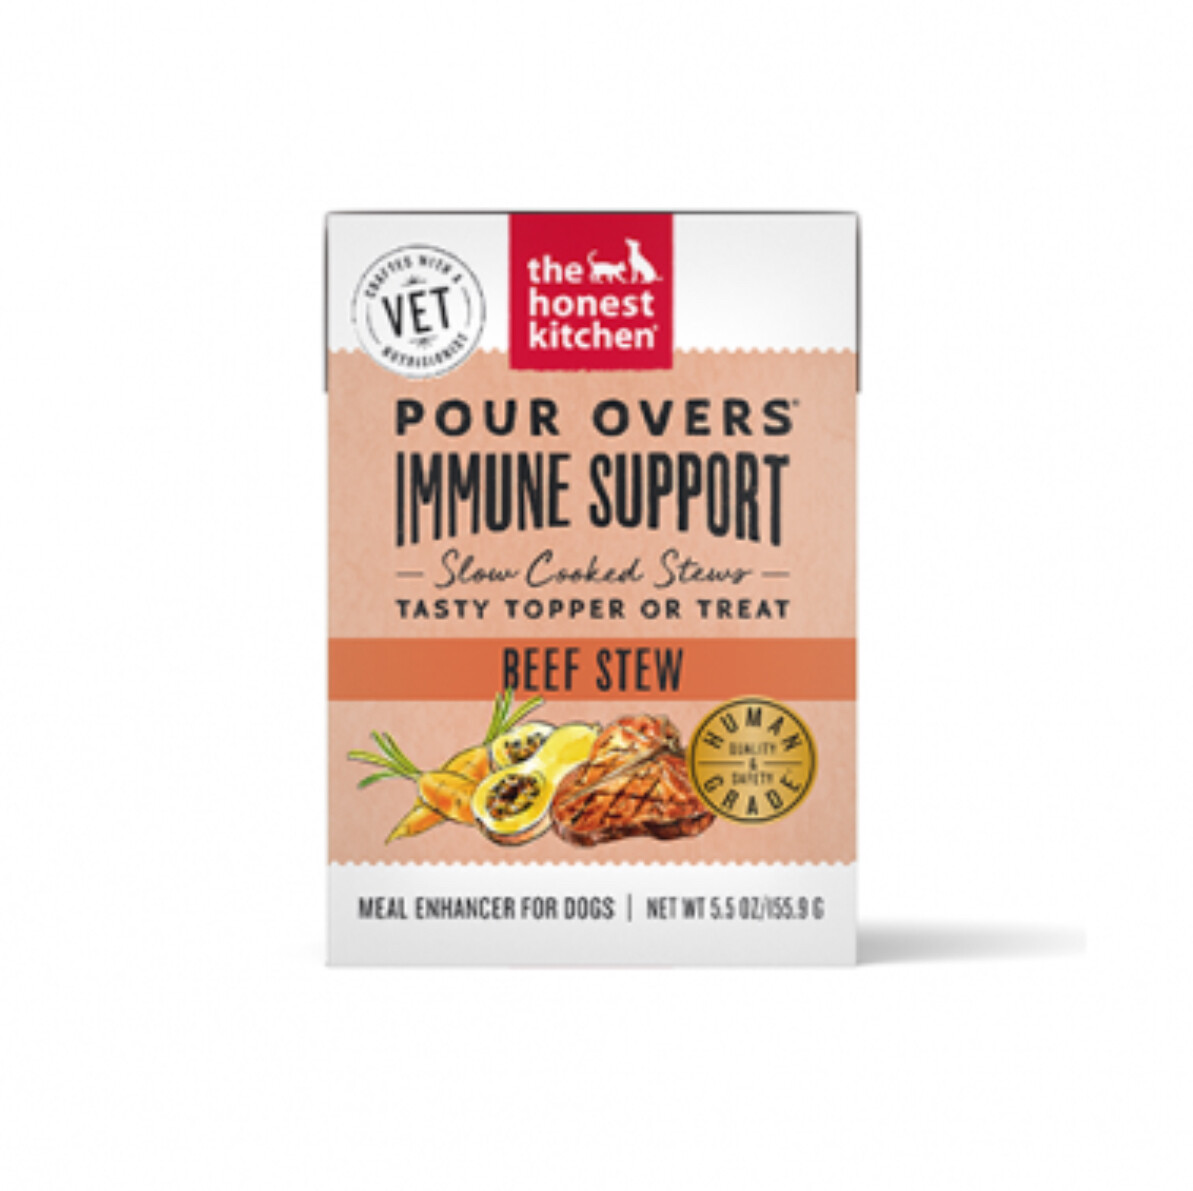 Immune Support Pour Overs - Beef Stew - The Honest Kitchen